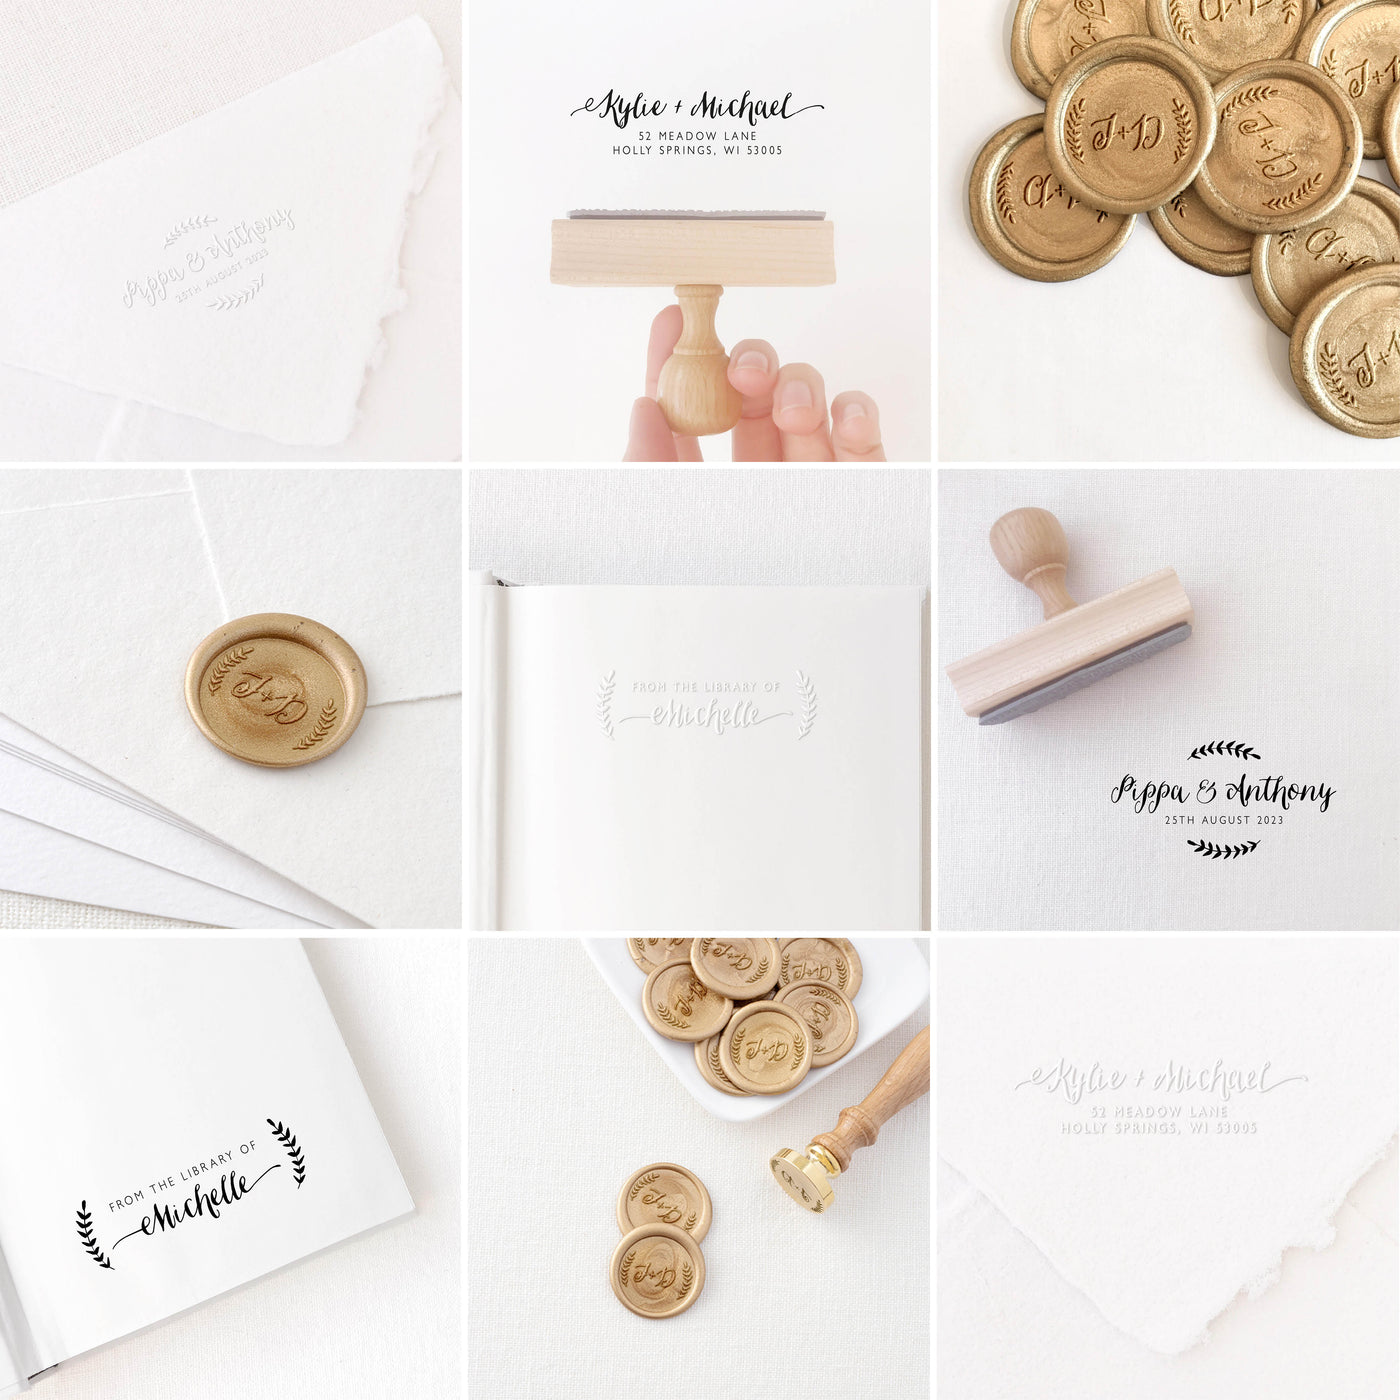 Hayley Rustic Botanical Script Save The Date Rubber Stamp | Custom Rubber Stamp, Wax Seal Stickers & Embosser for Custom Luxe Embellishment Packaging & Fine Art Wedding Stationery Invitations | Heirloom Seals